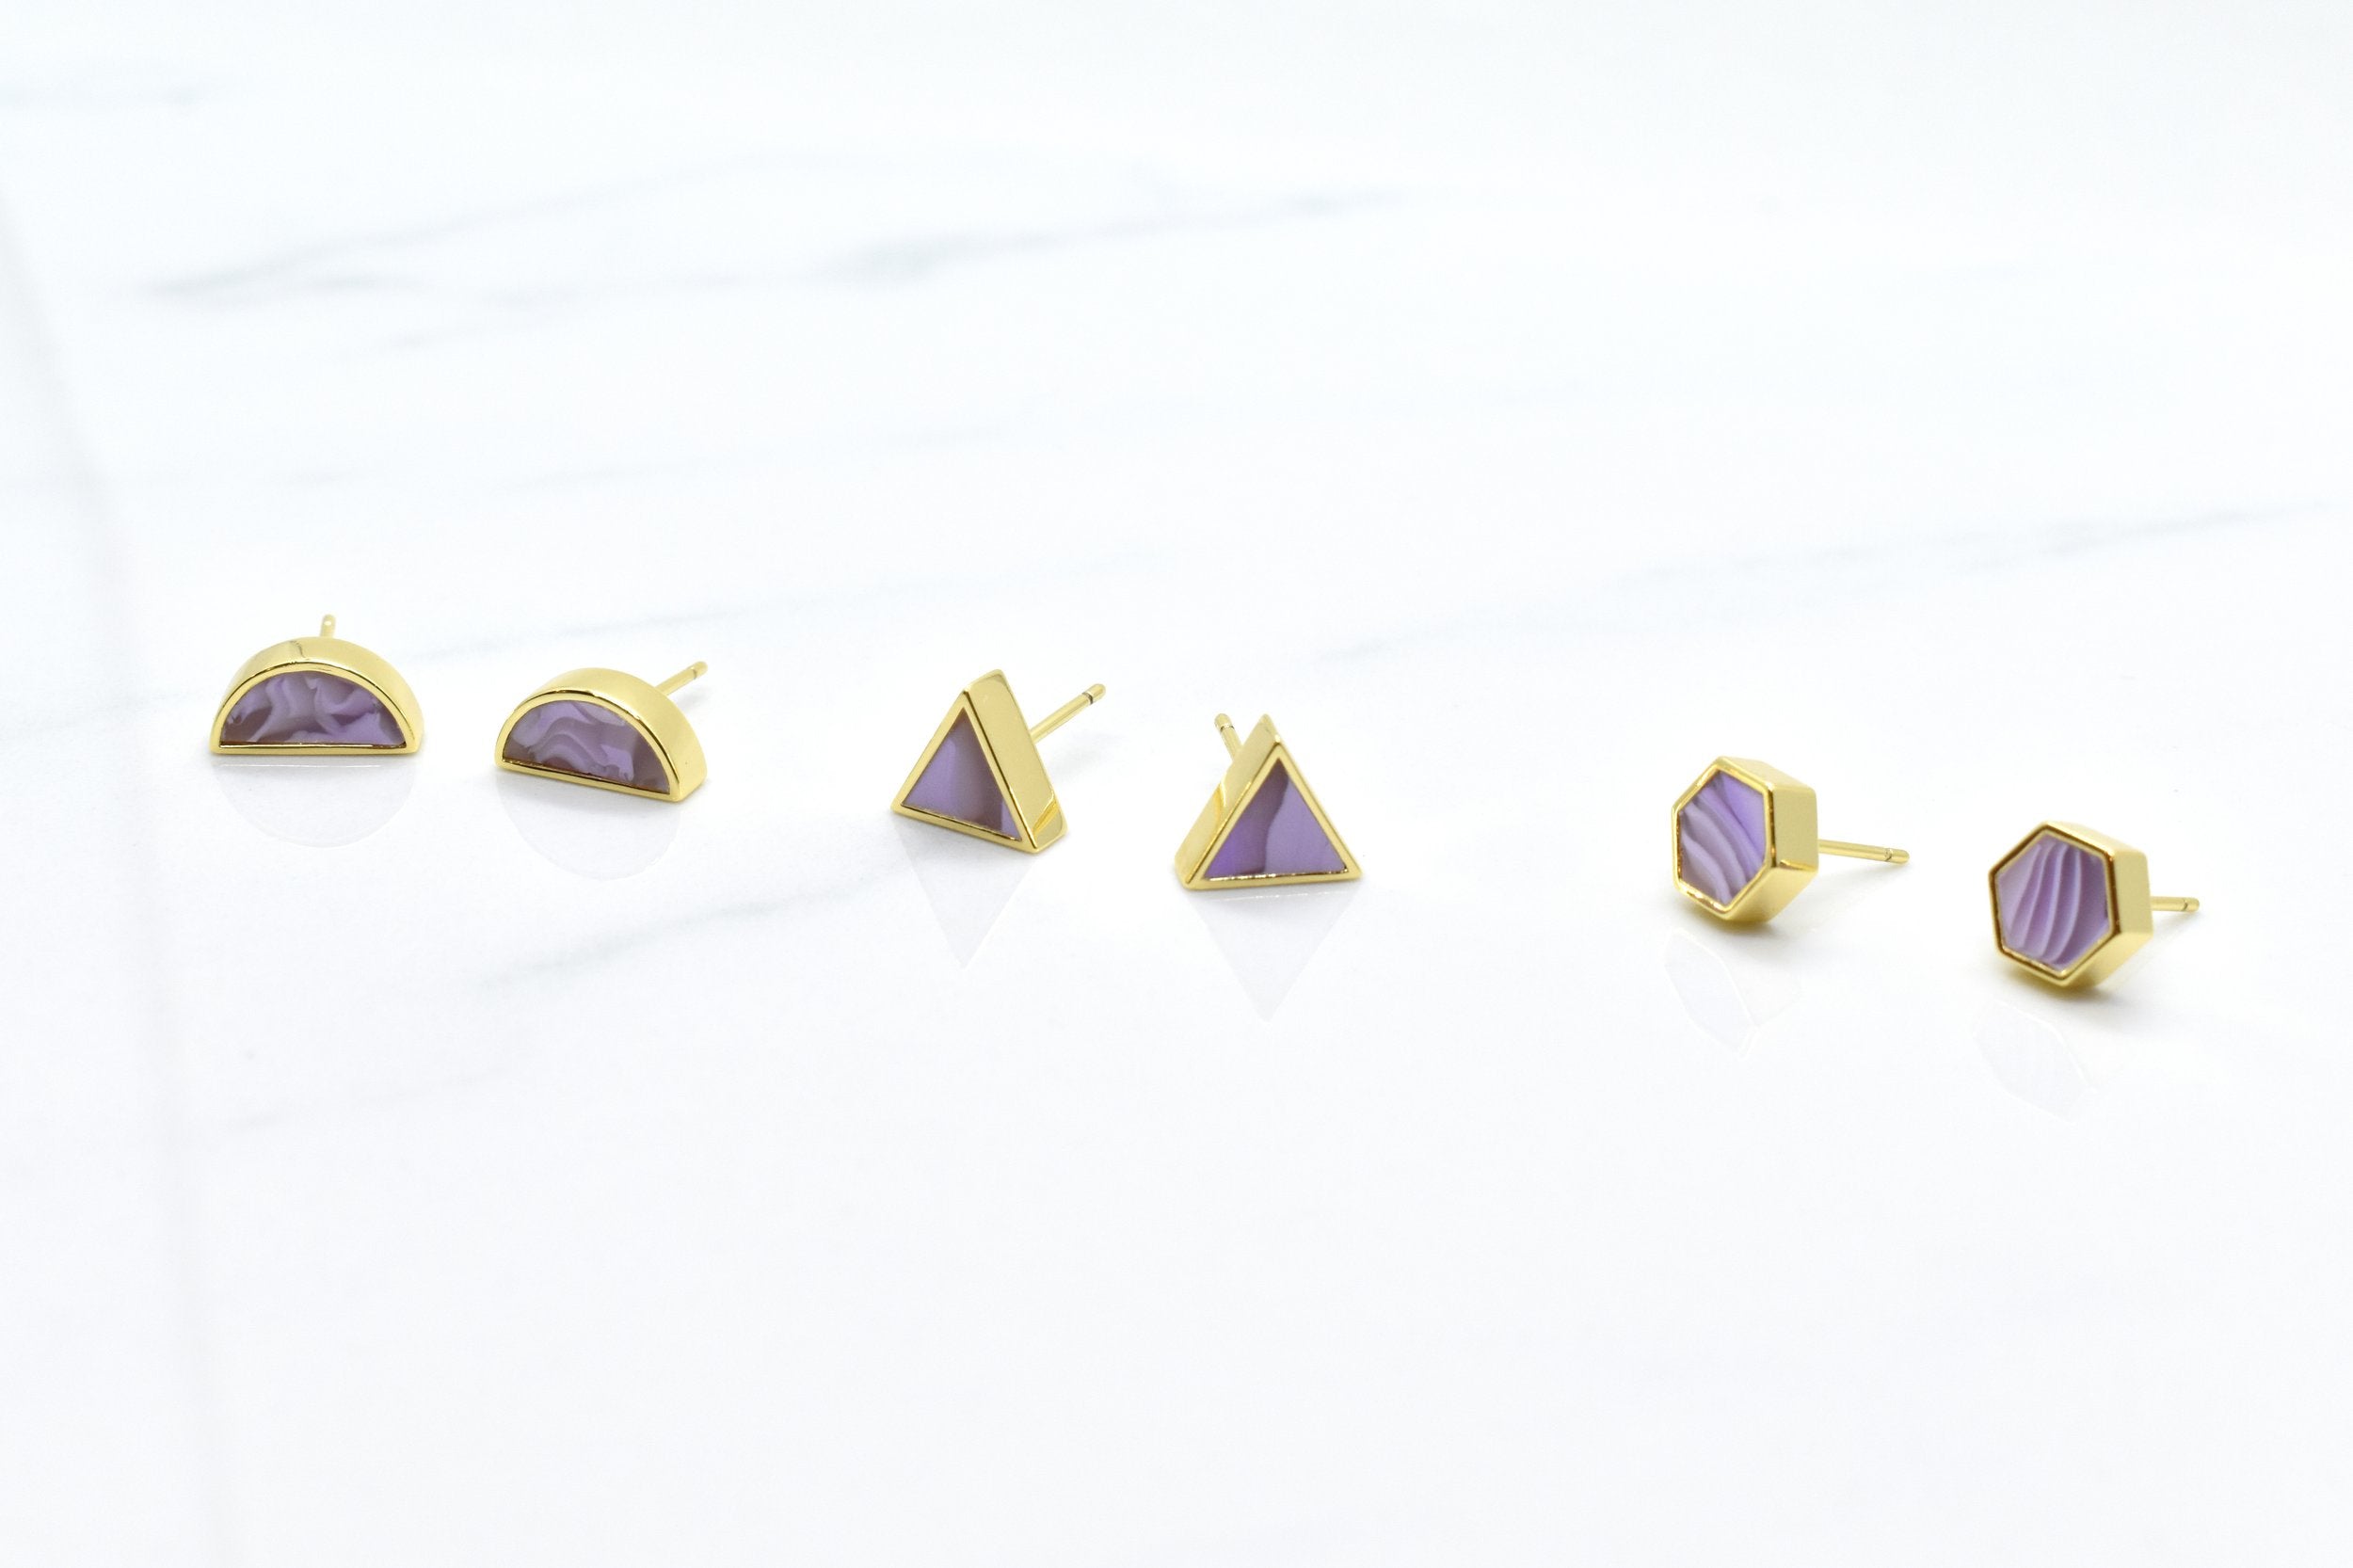 three pairs of modern and minimal pastel purple earrings in three shapes: hexagon studs, triangle studs, and half-moon studs with gold details.